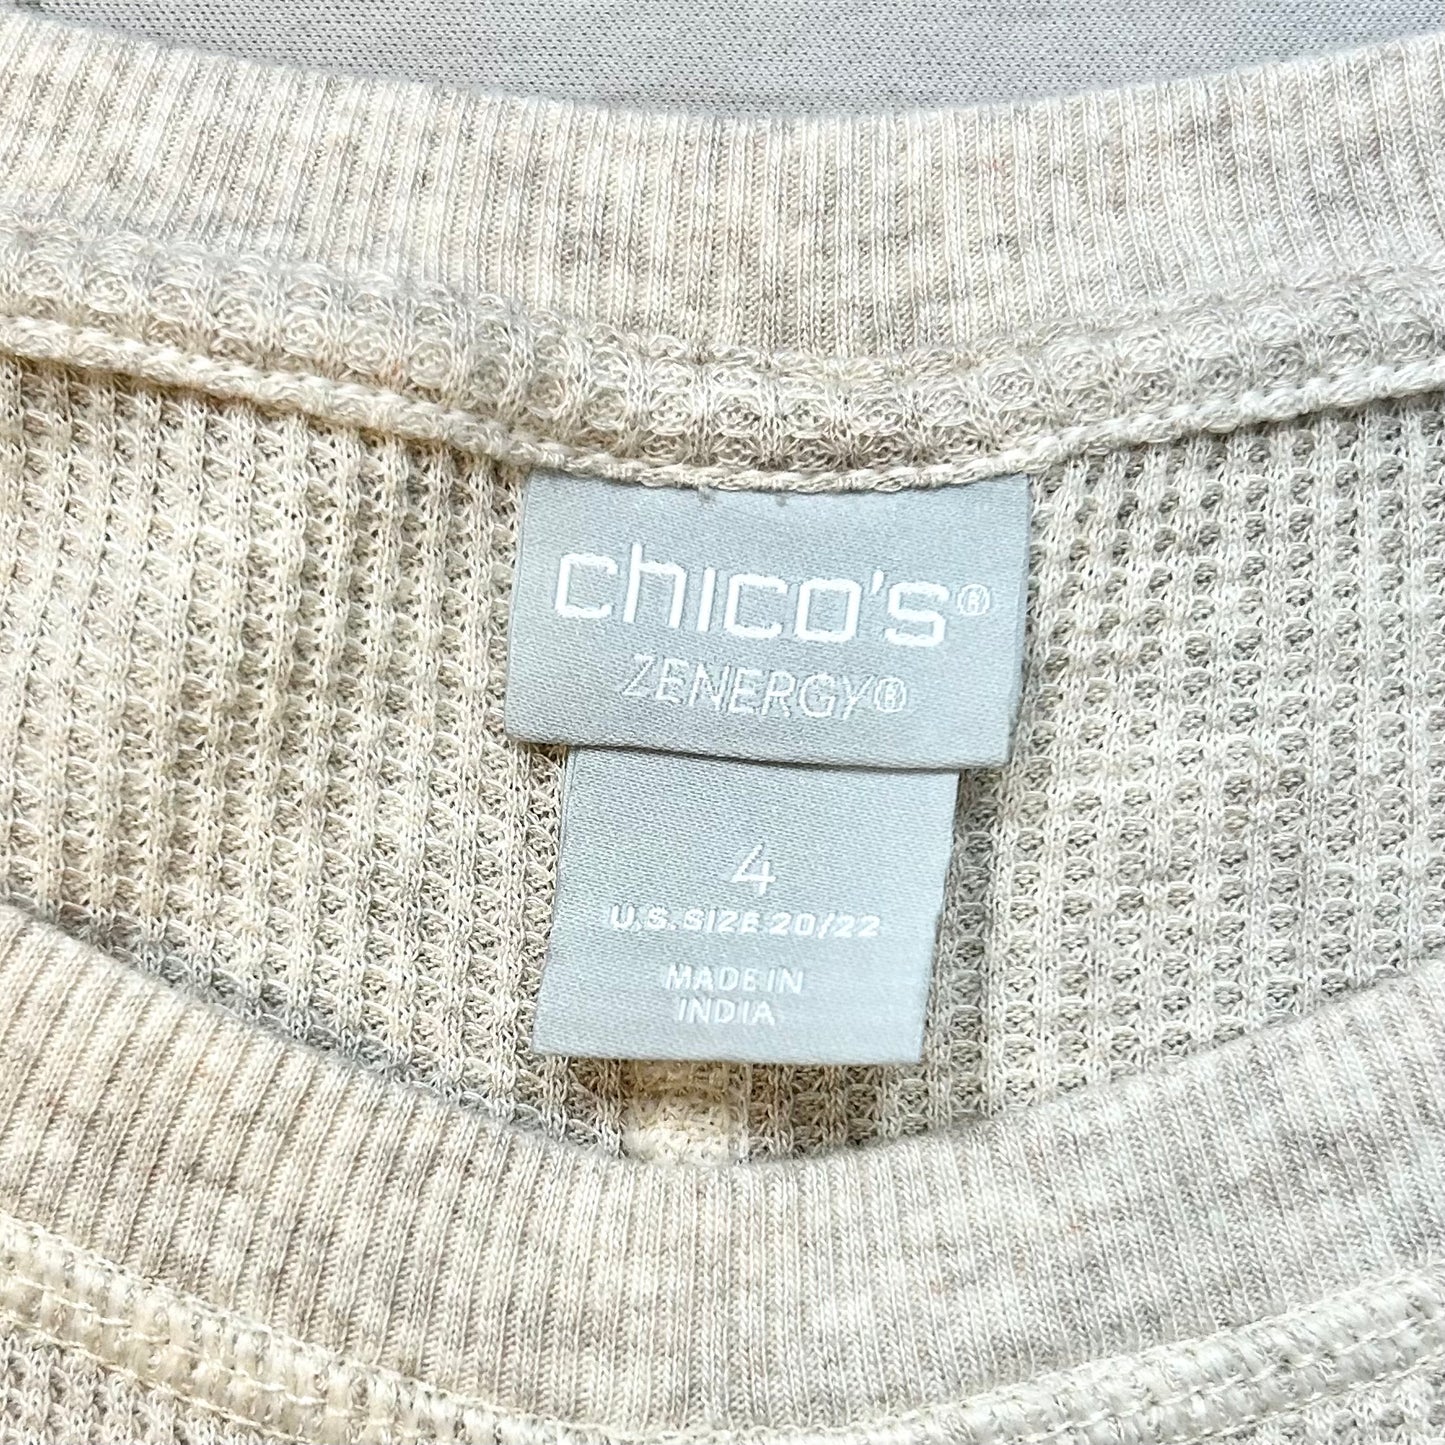 Top Long Sleeve Basic By Chicos  Size: Xxl